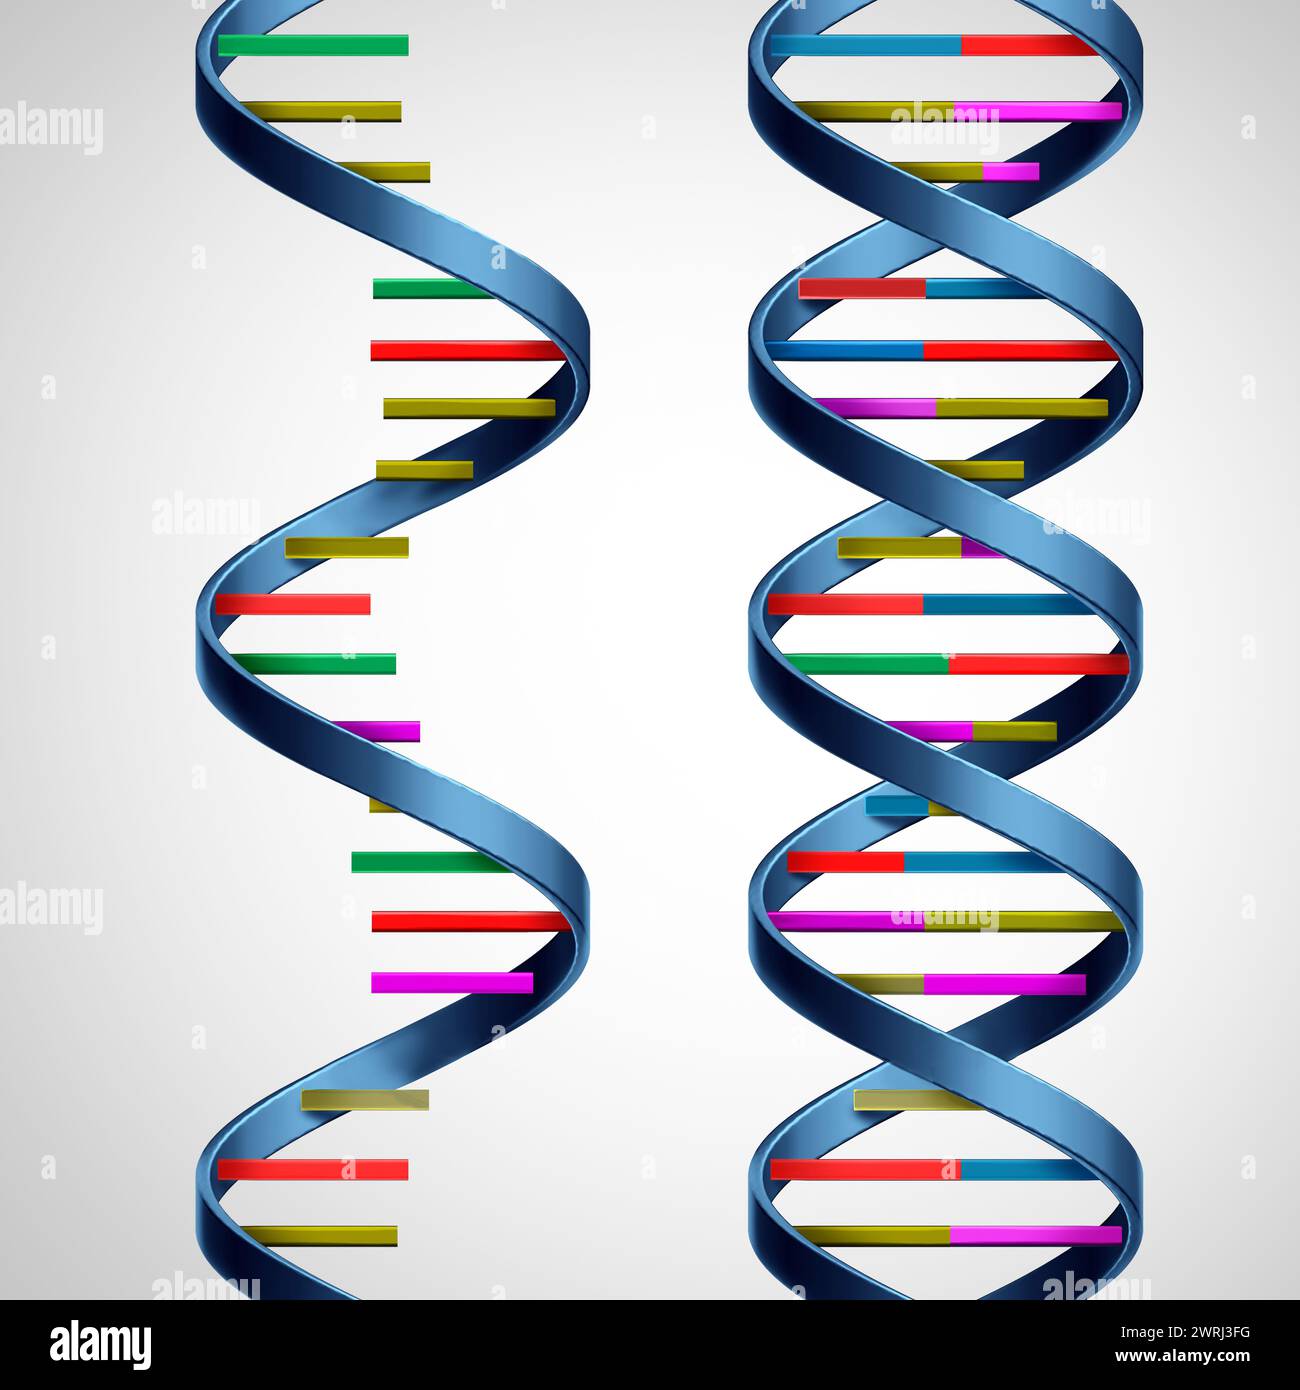 RNA And DNA concept as a deoxyribonucleic acid or a ribonucleic acid as biological molecules as a symbol of the evolution of life and genetic Stock Photo